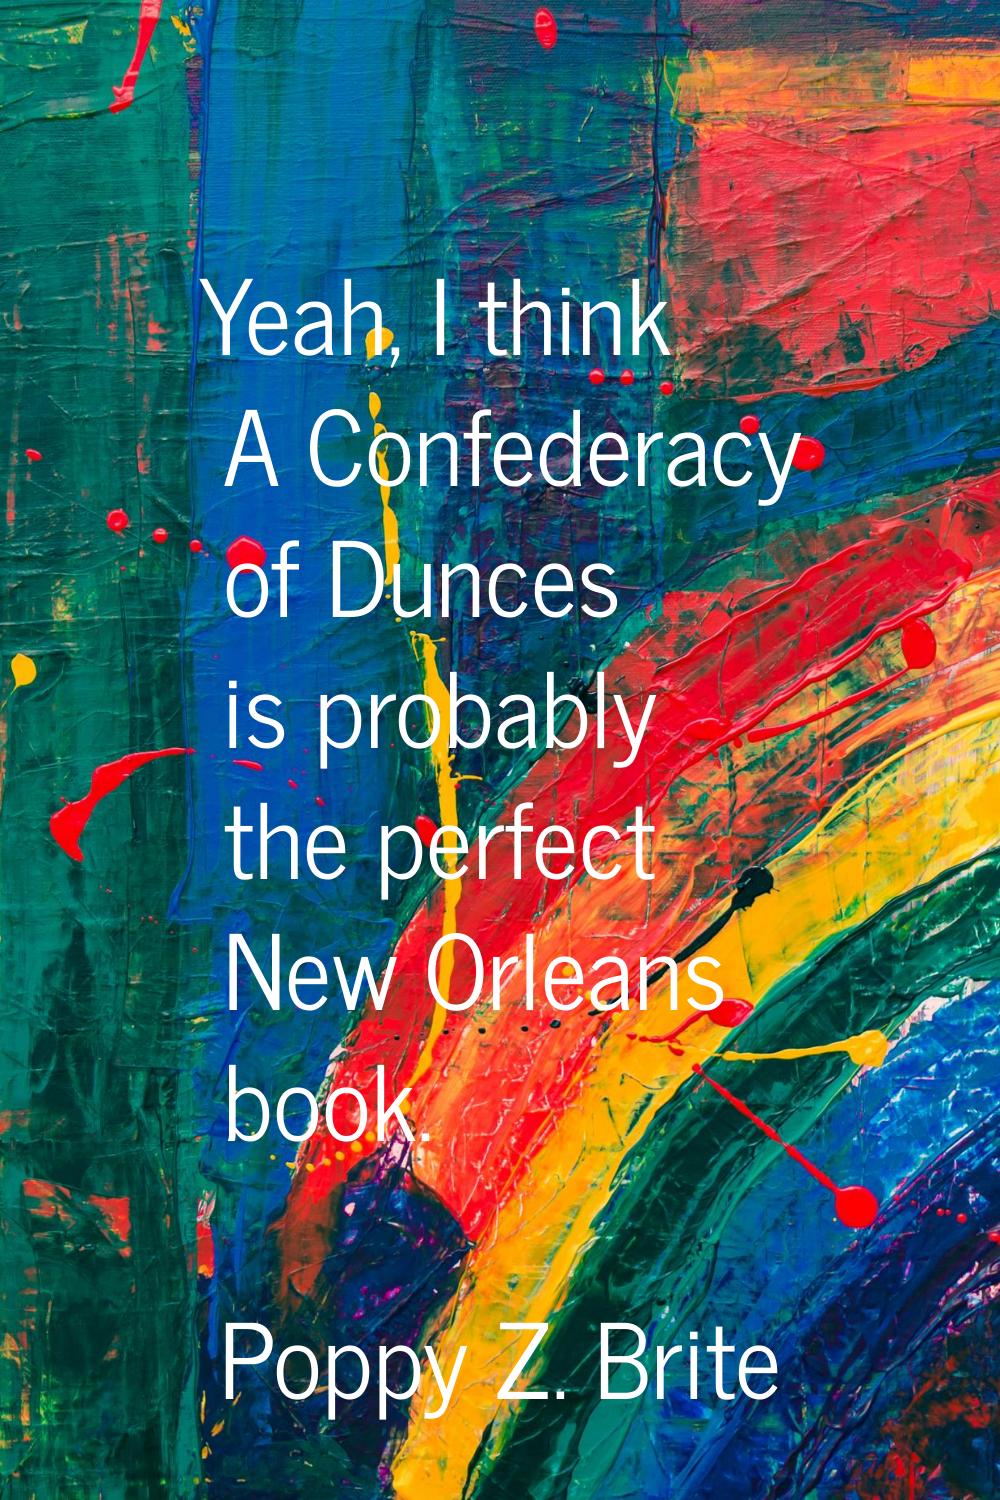 Yeah, I think A Confederacy of Dunces is probably the perfect New Orleans book.